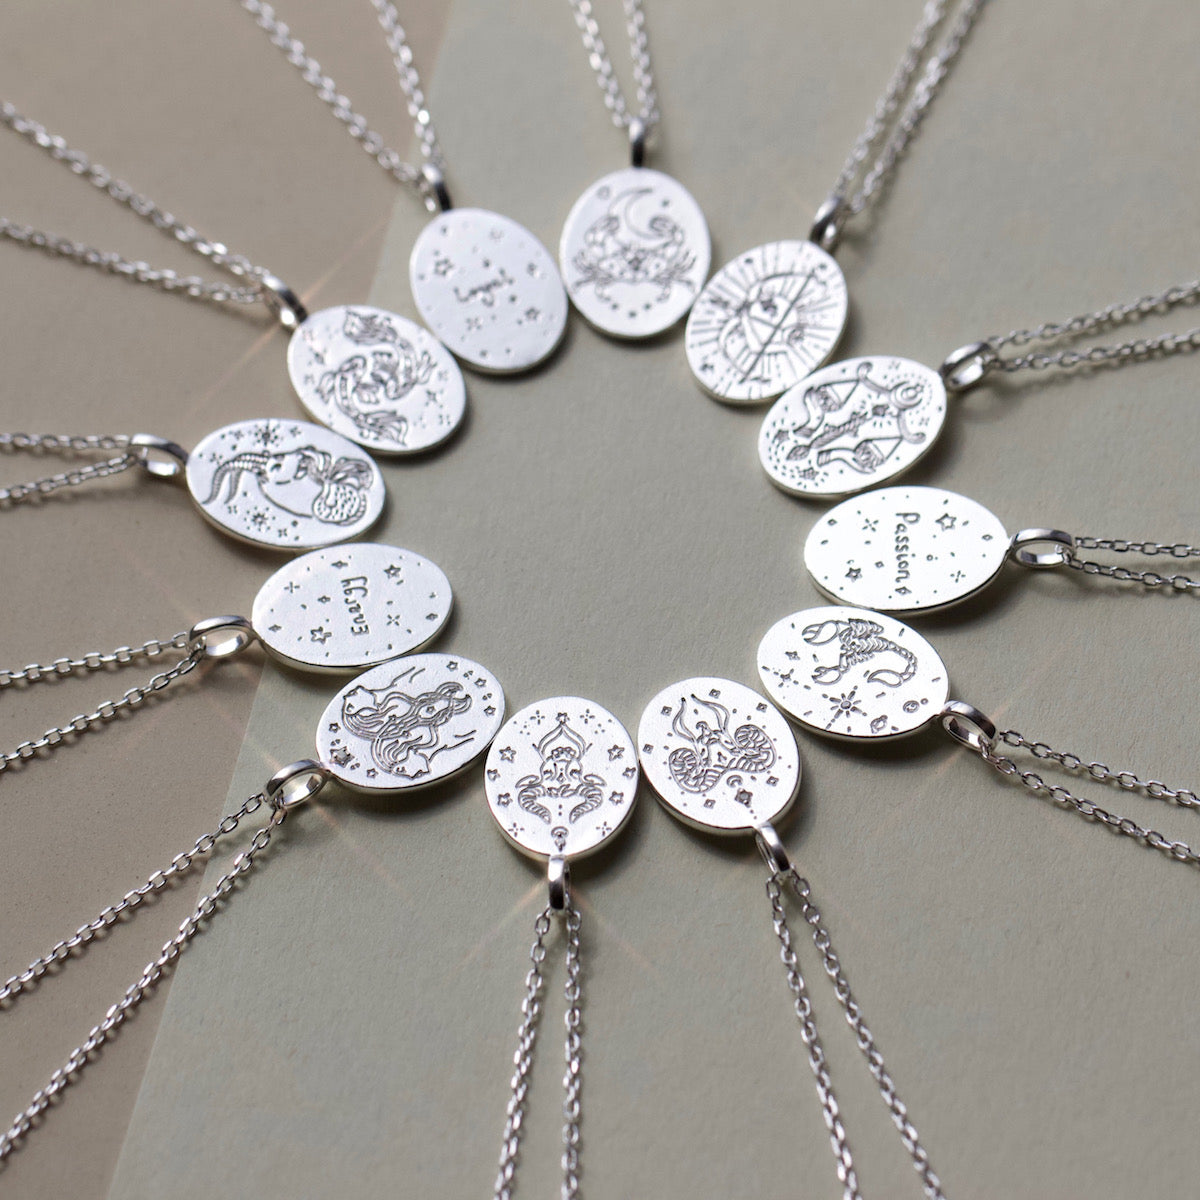 Gorgeous Sterling silver necklaces crafted by Carrie Elizabeth Jewellery 